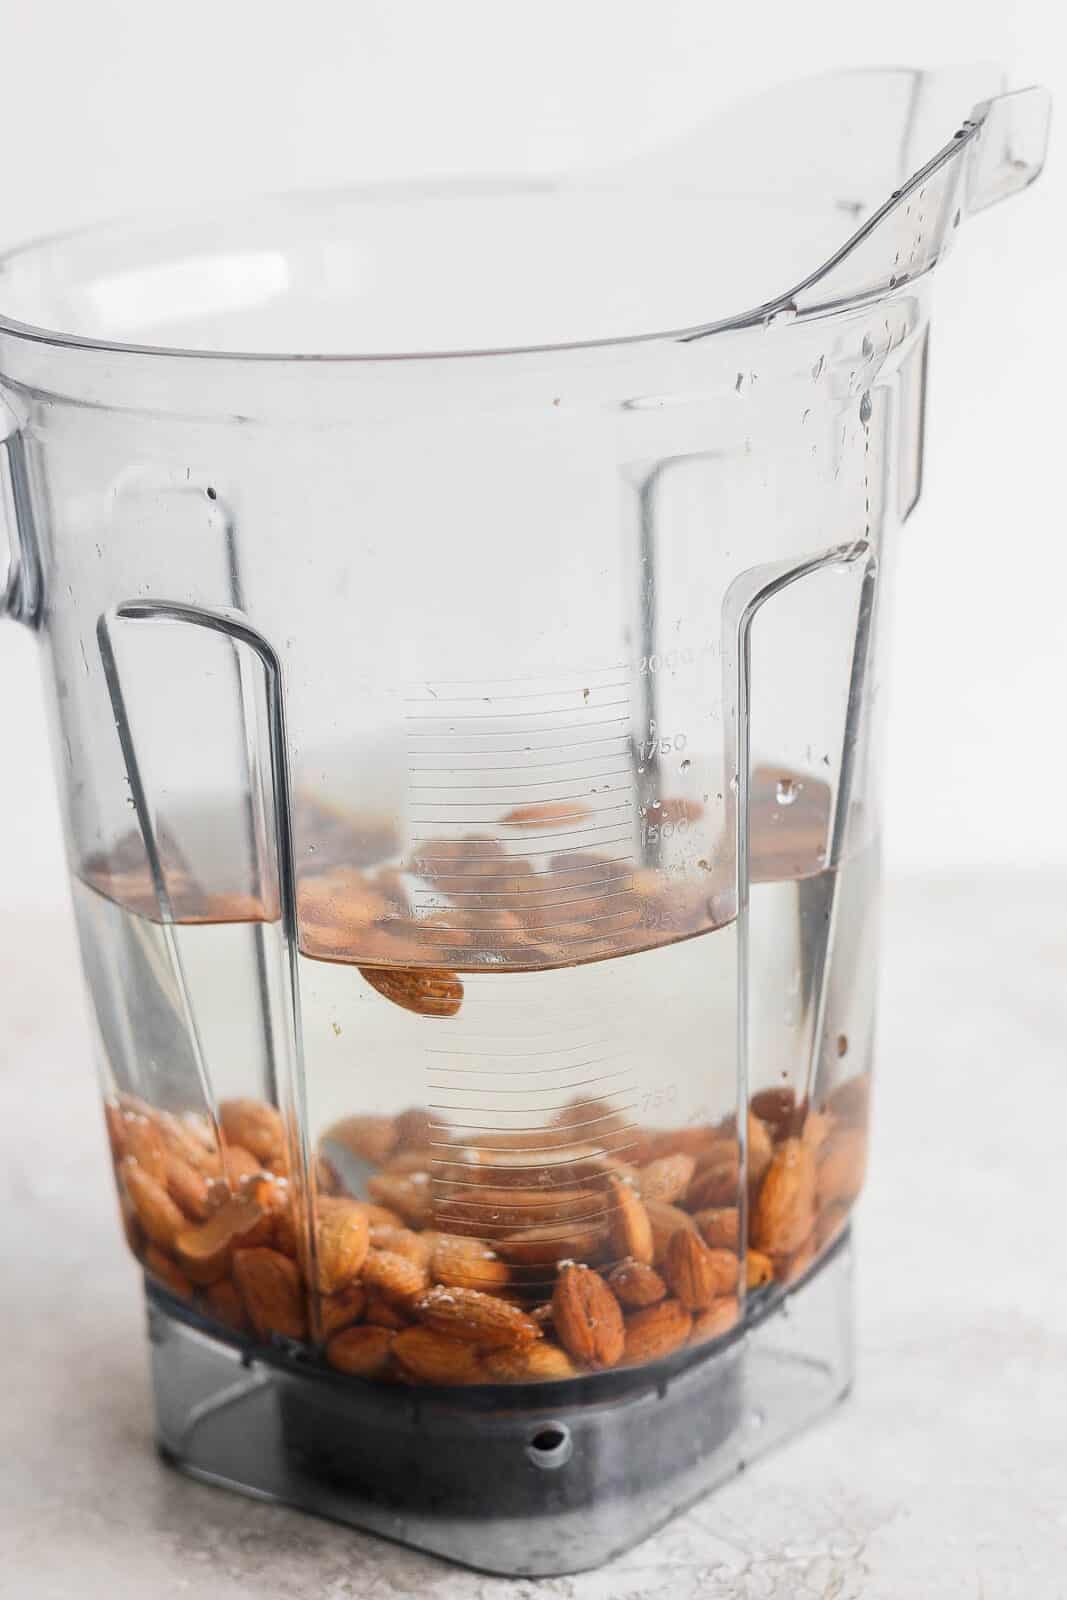 Raw almonds in a blender with water; side view.